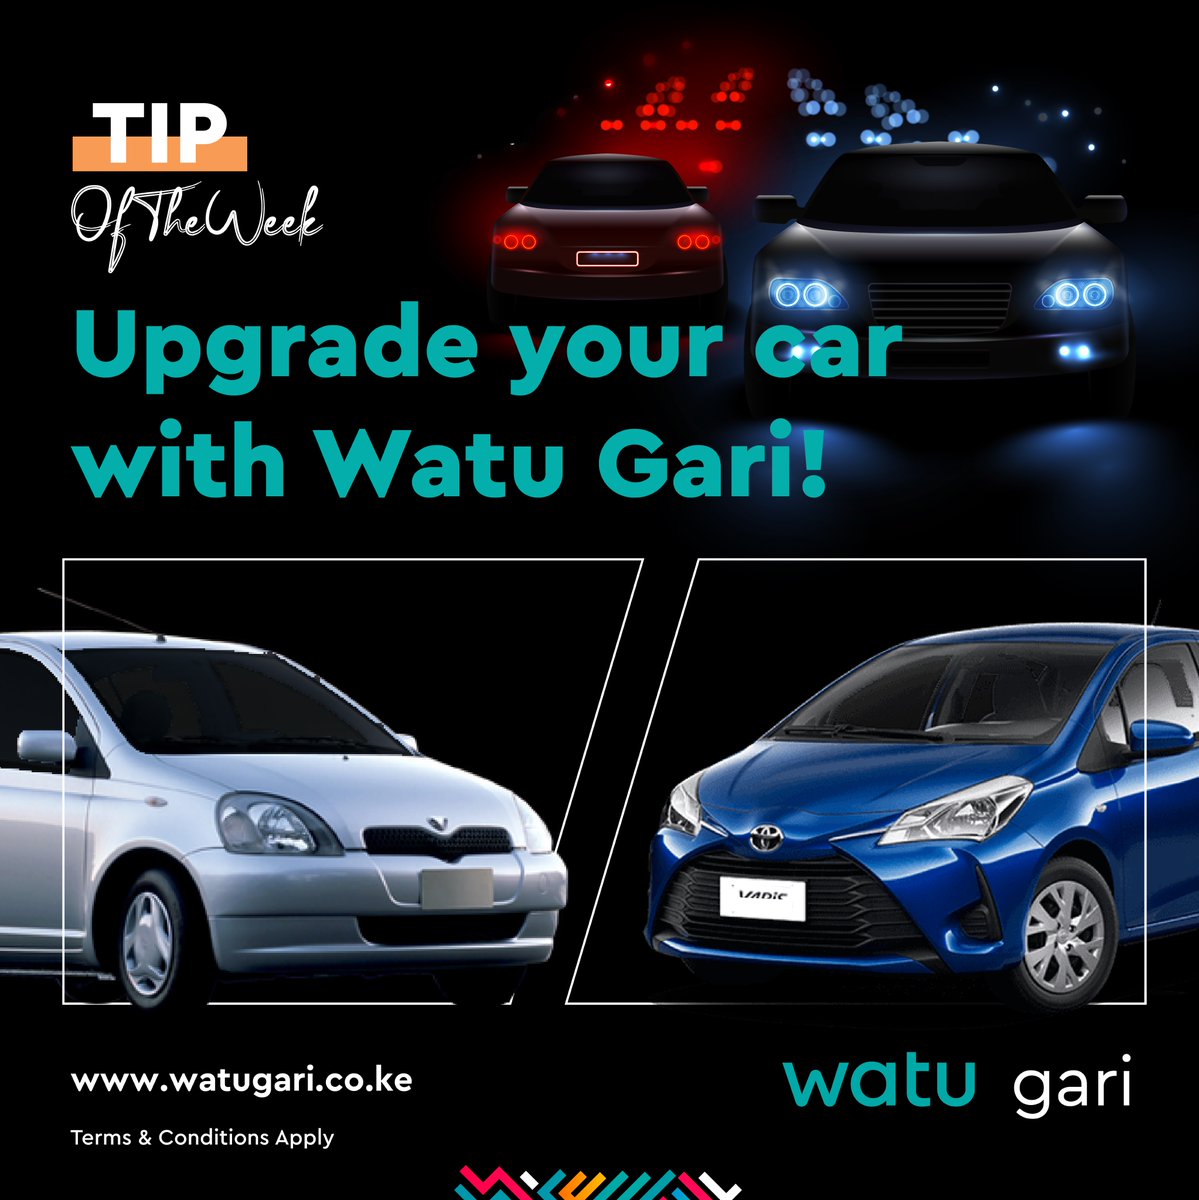 Upgrading your car to the latest model with a Watu Gari car loan is a straight forward process!

All you need is atleast 20% deposit, of the car's value.   Call us on 0800 722 900 OR visit us at #NgongRoad OR #KiambuRoad to apply today!  

Apply online: watugari.co.ke